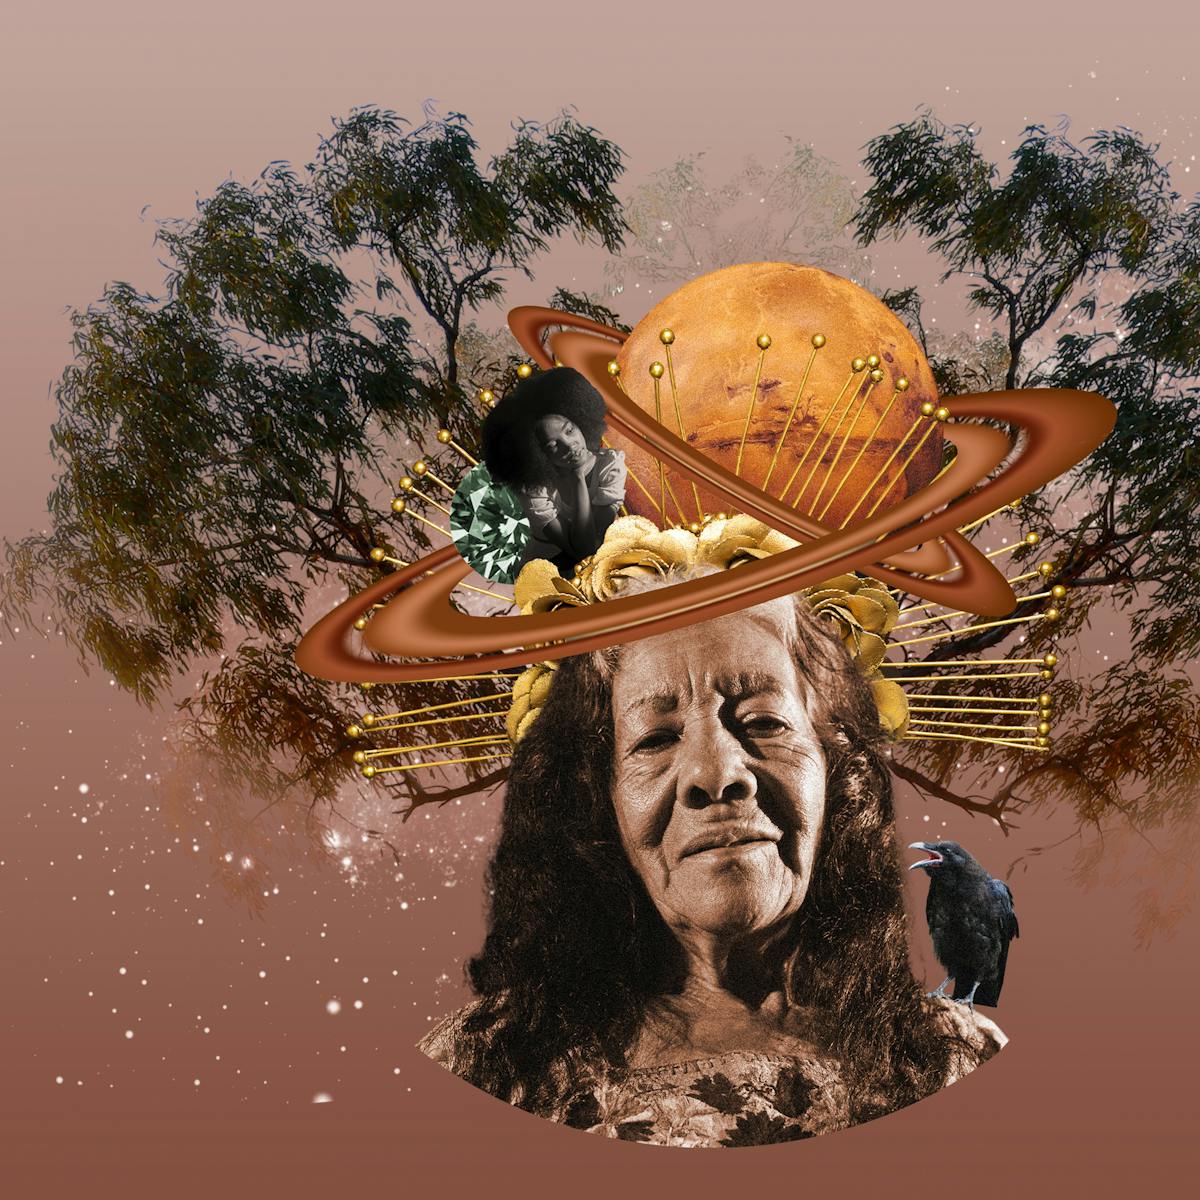 Digital collage artwork made up of rusts, orange and yellow hues. A cluster of collaged elements sit at the centre of the image. The atmosphere is one the natural world, female humanity and the wider cosmos A large central older female face looks out at us. Her head is framed by 2 symmetric trees, above her head is a Saturn-like planet, a small female figure rests on a golden headdress of rose petals. One the central figure's shoulder sits a crow, beak open.